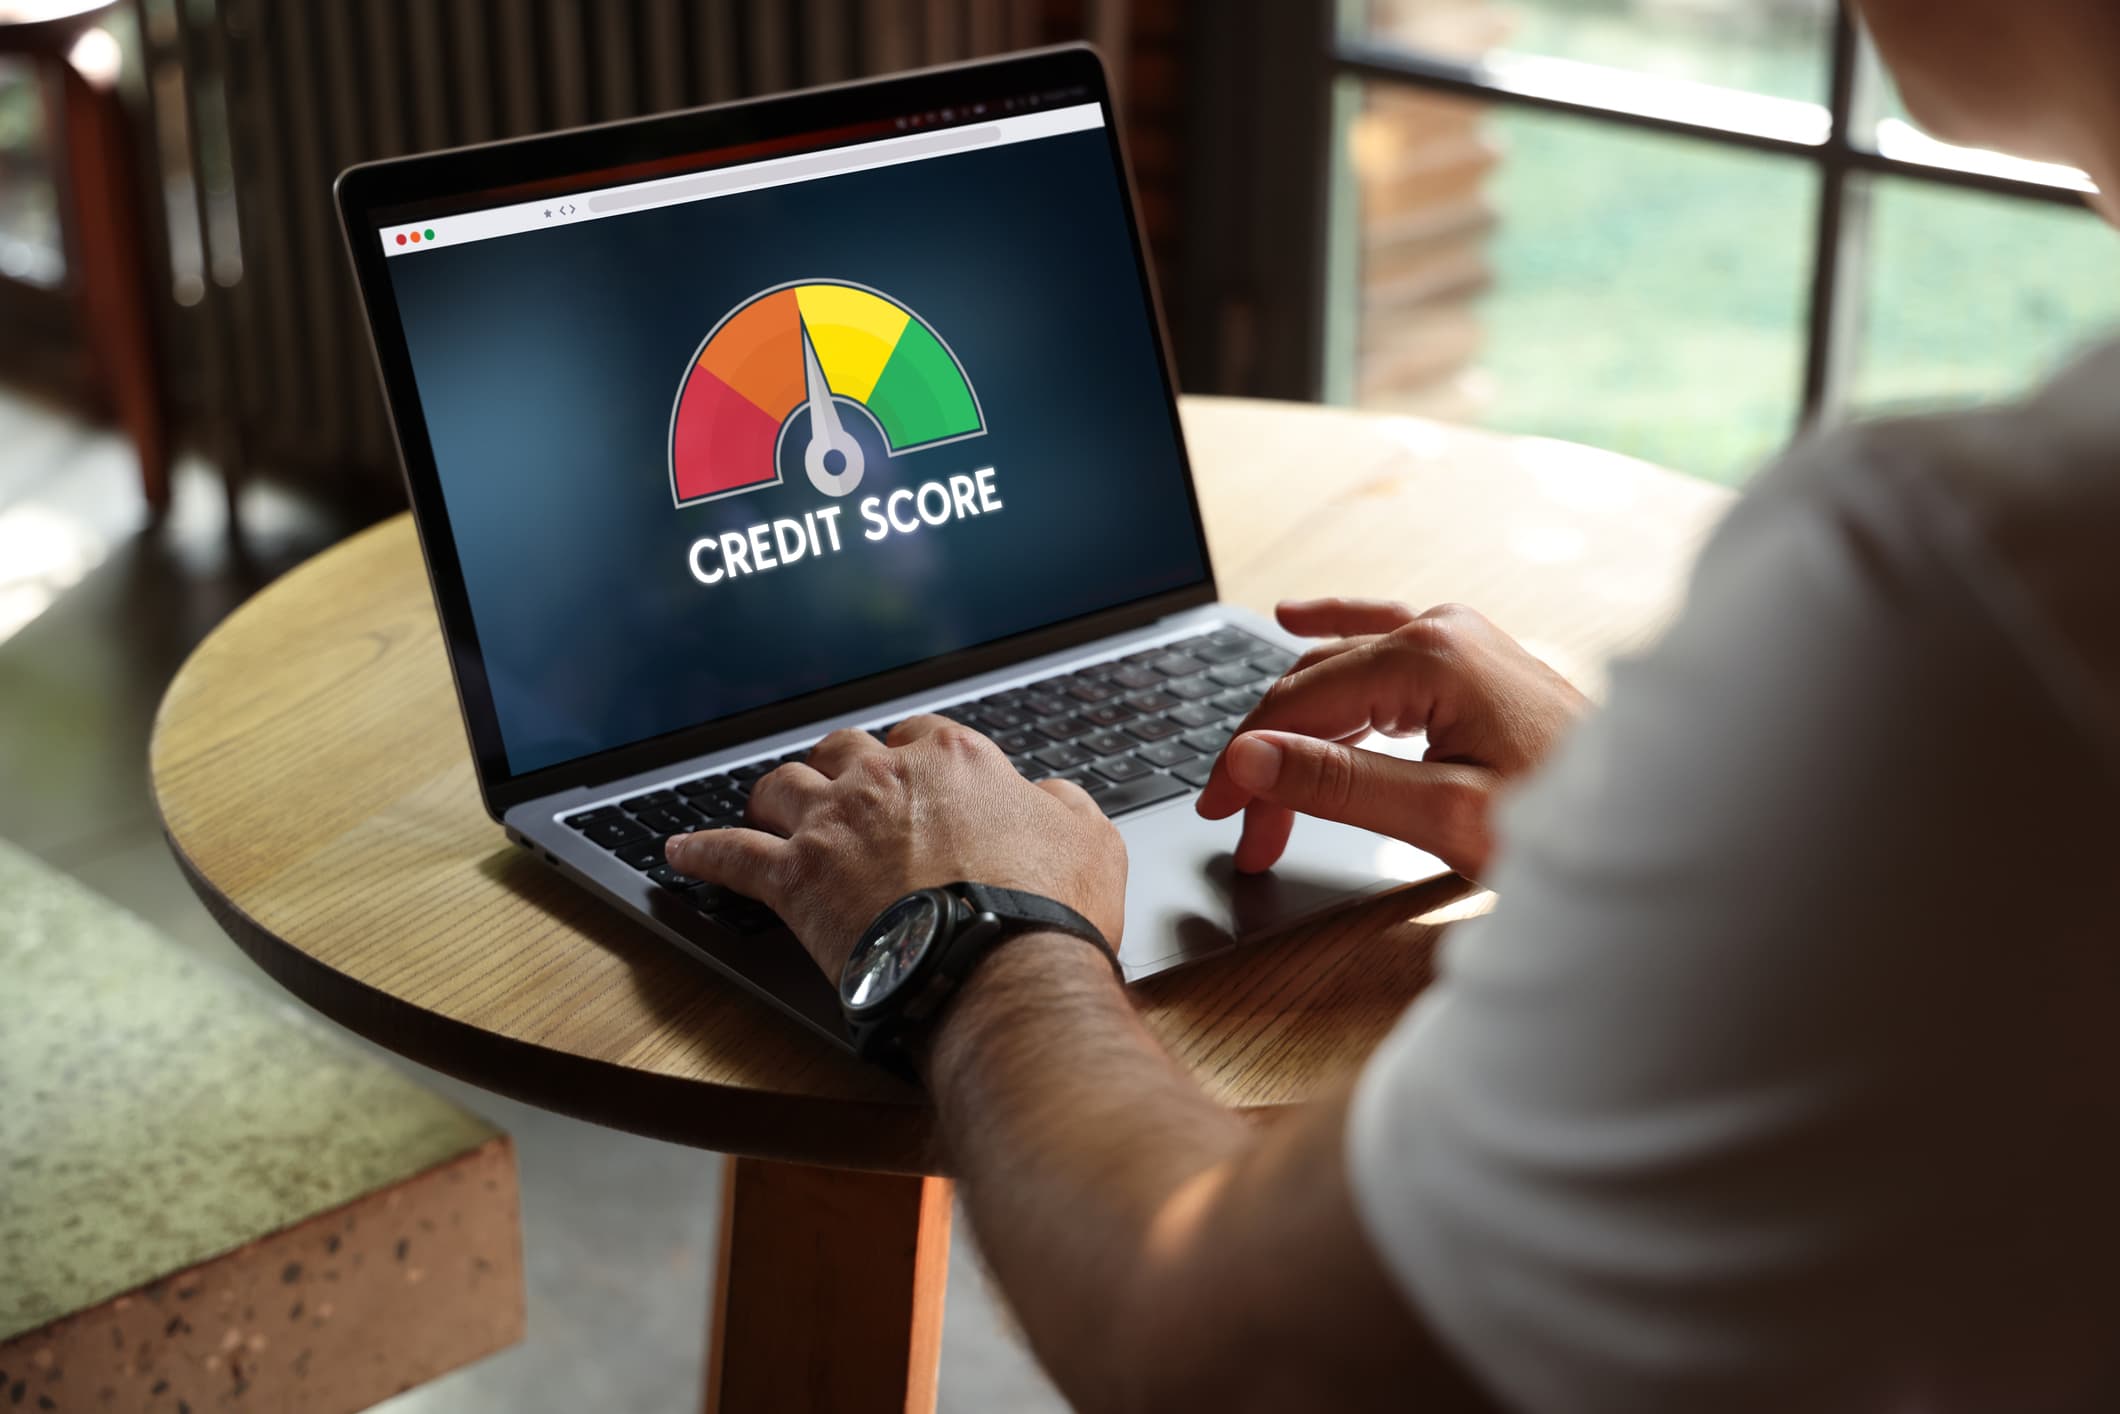 The average credit score falls for the first time in 10 years